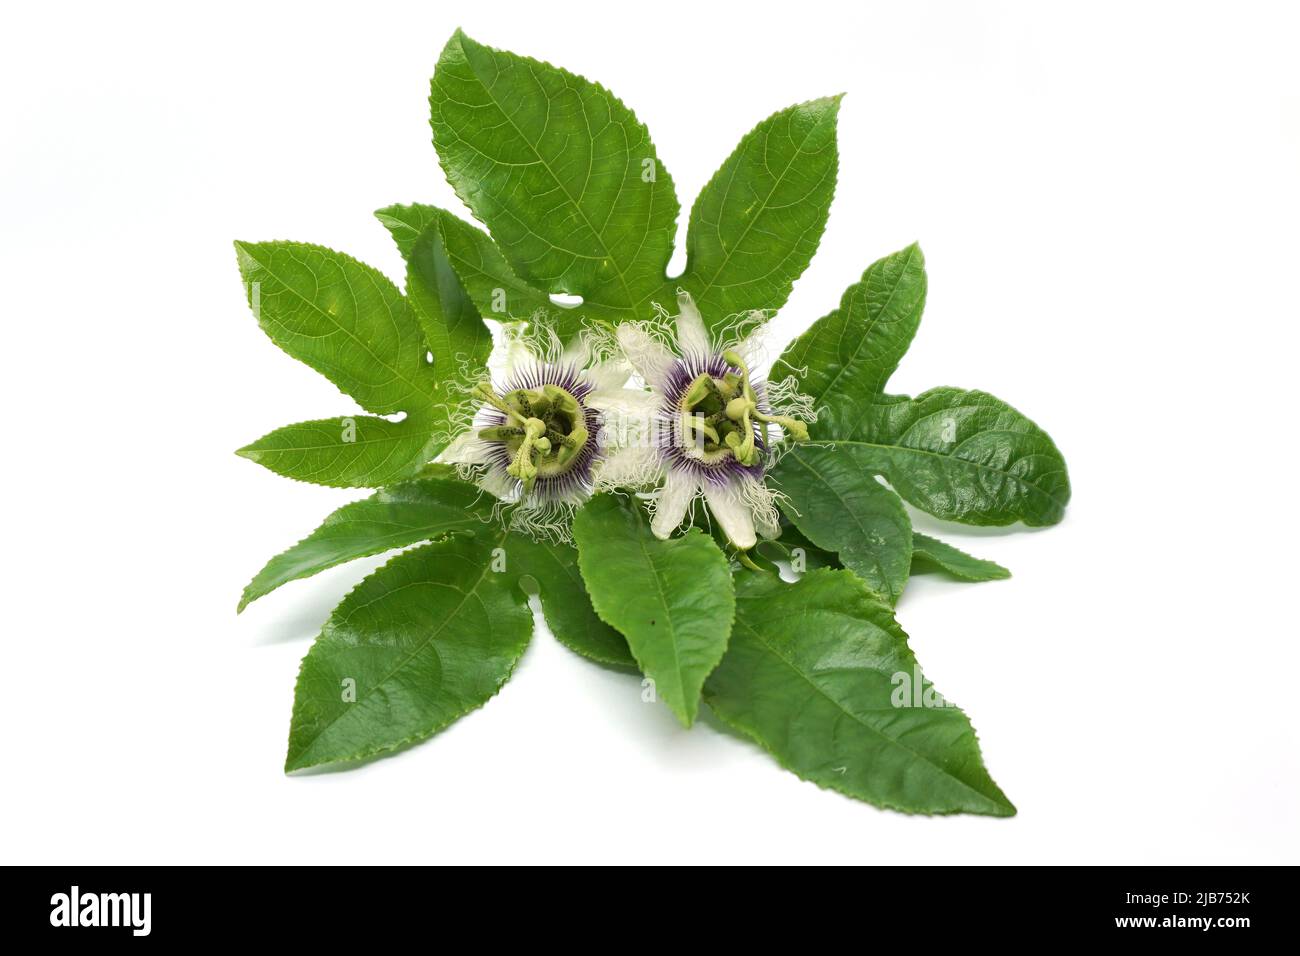 Stem green leaves with passion fruit flowers Stock Photo